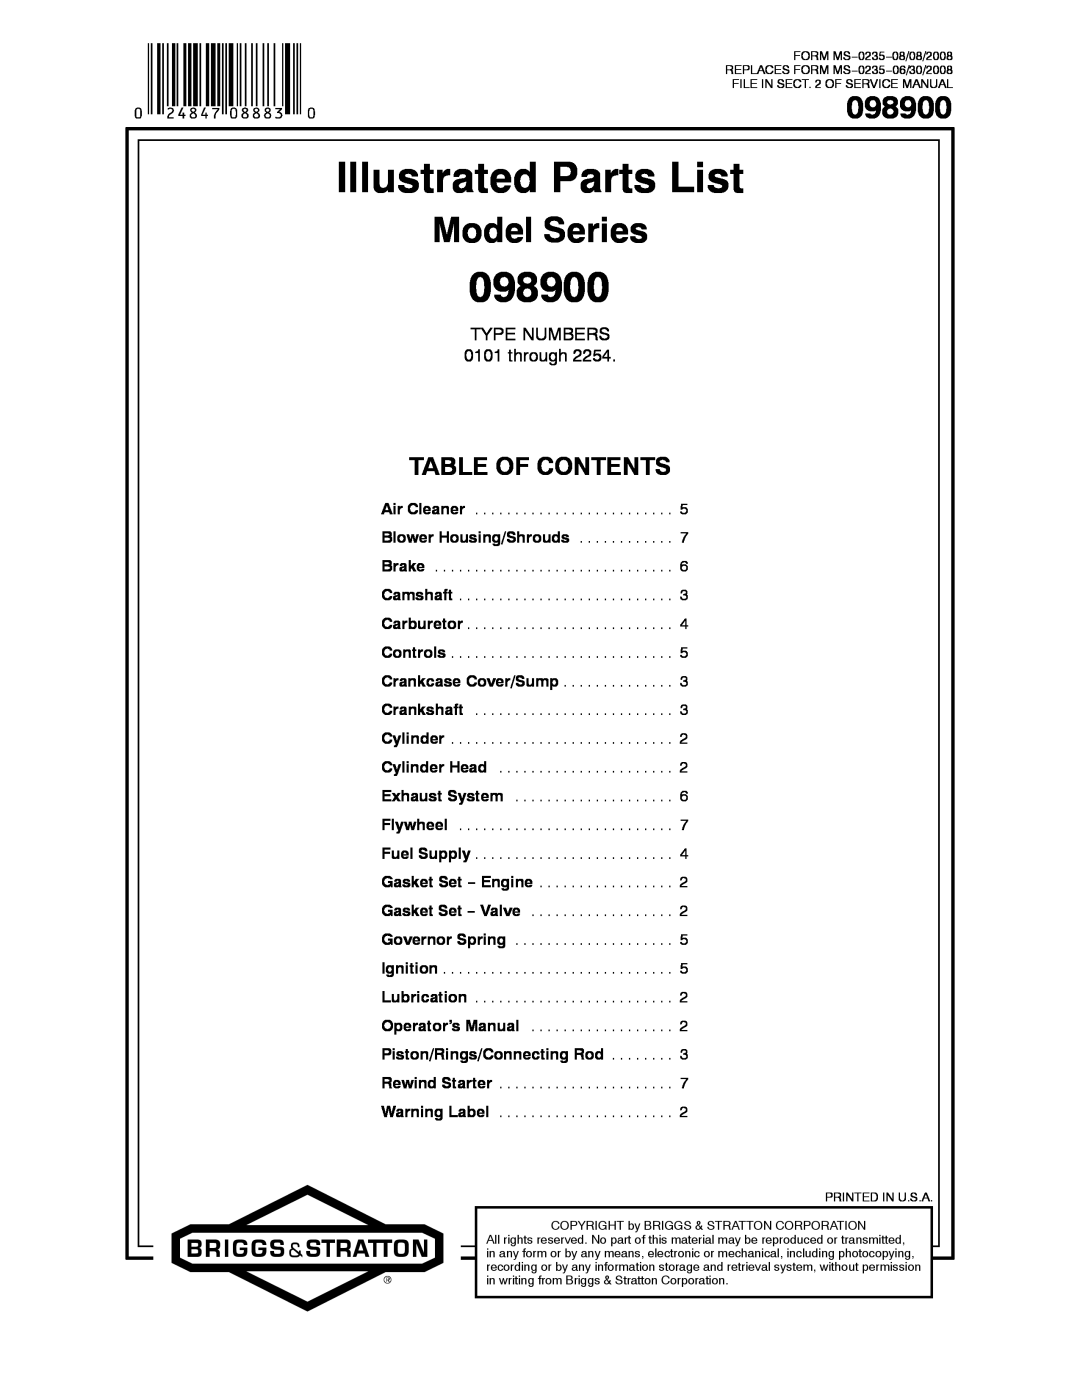 Snapper 098900 service manual Illustrated Parts List, Model Series, Table Of Contents, TYPE NUMBERS 0101 through 